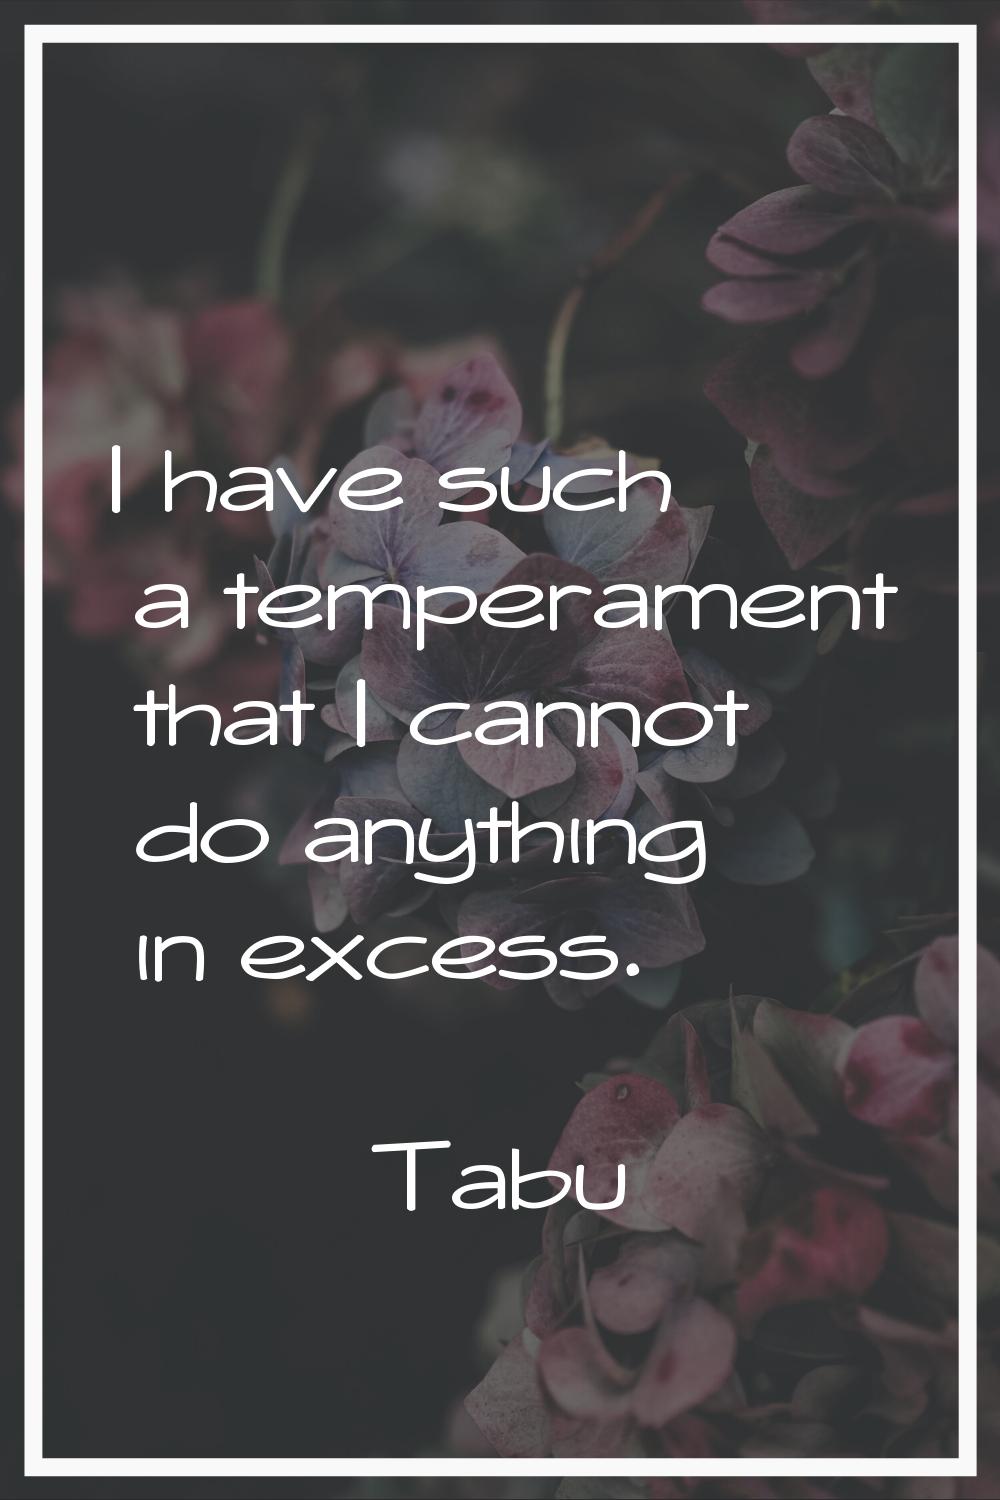 I have such a temperament that I cannot do anything in excess.